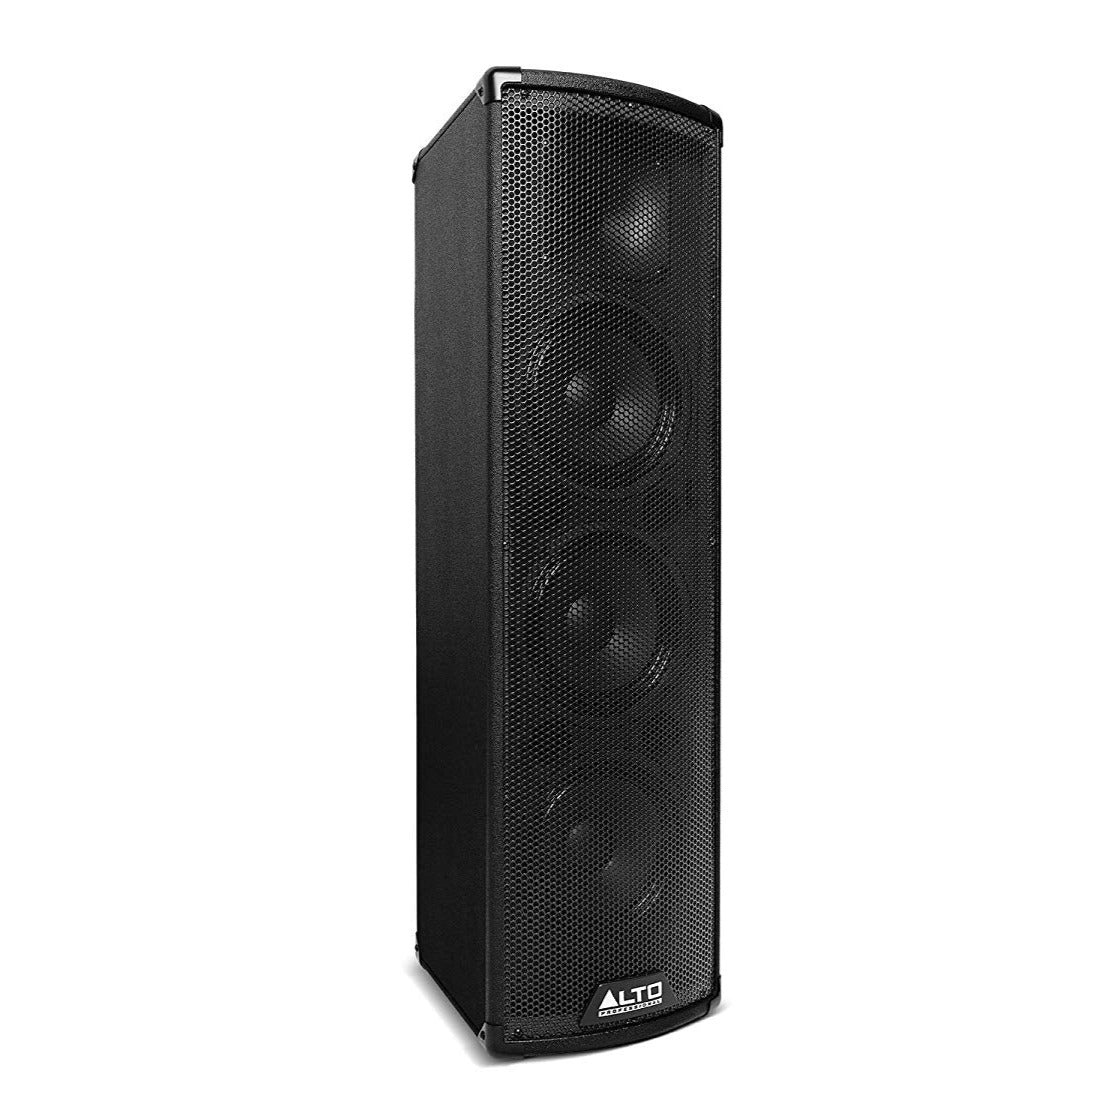 Alto Professional Trouper 200W Bi-Amplified Bluetooth PA System with 3-Channel Mixer